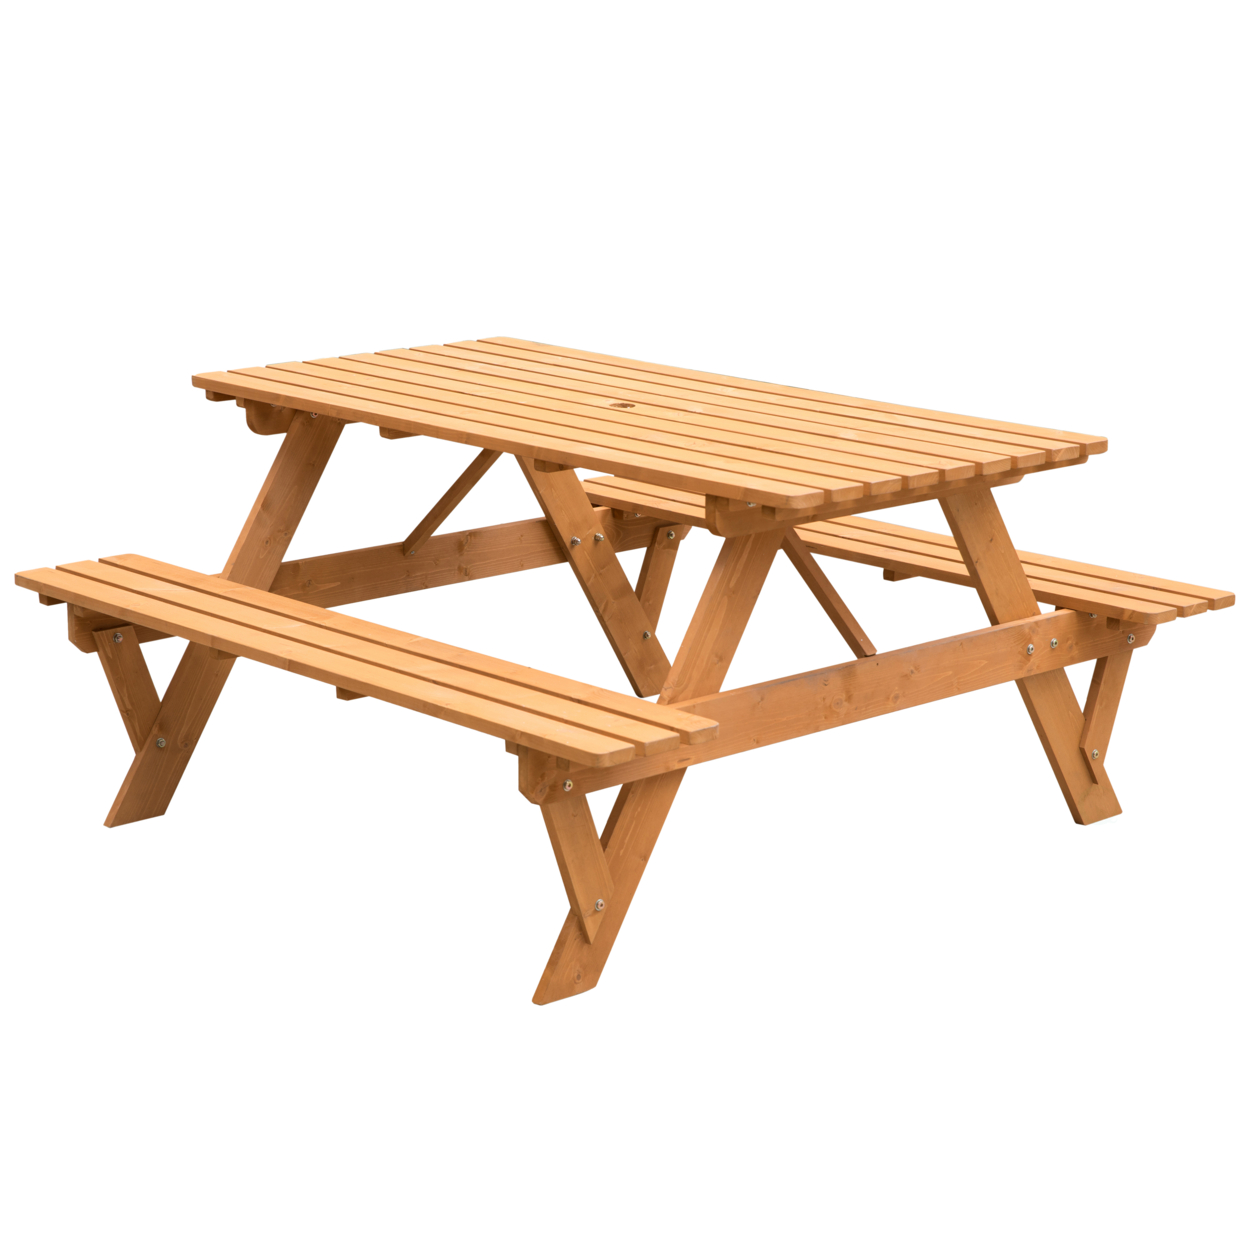 A-Frame Outdoor Patio Deck Garden Picnic Table - stained